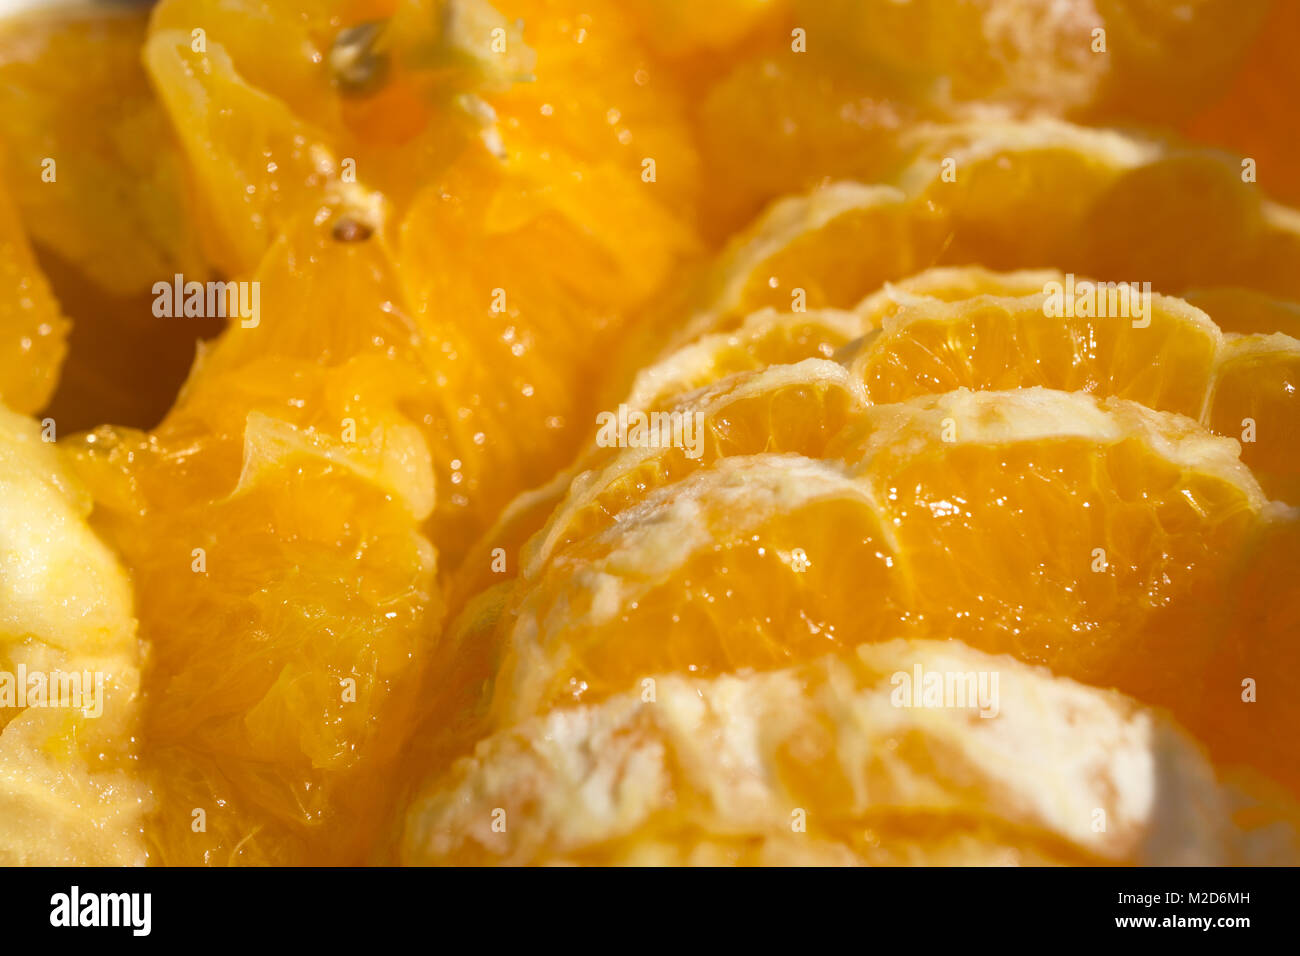 Closeup of sliced oranges in a glass bowl in the sun. Stock Photo